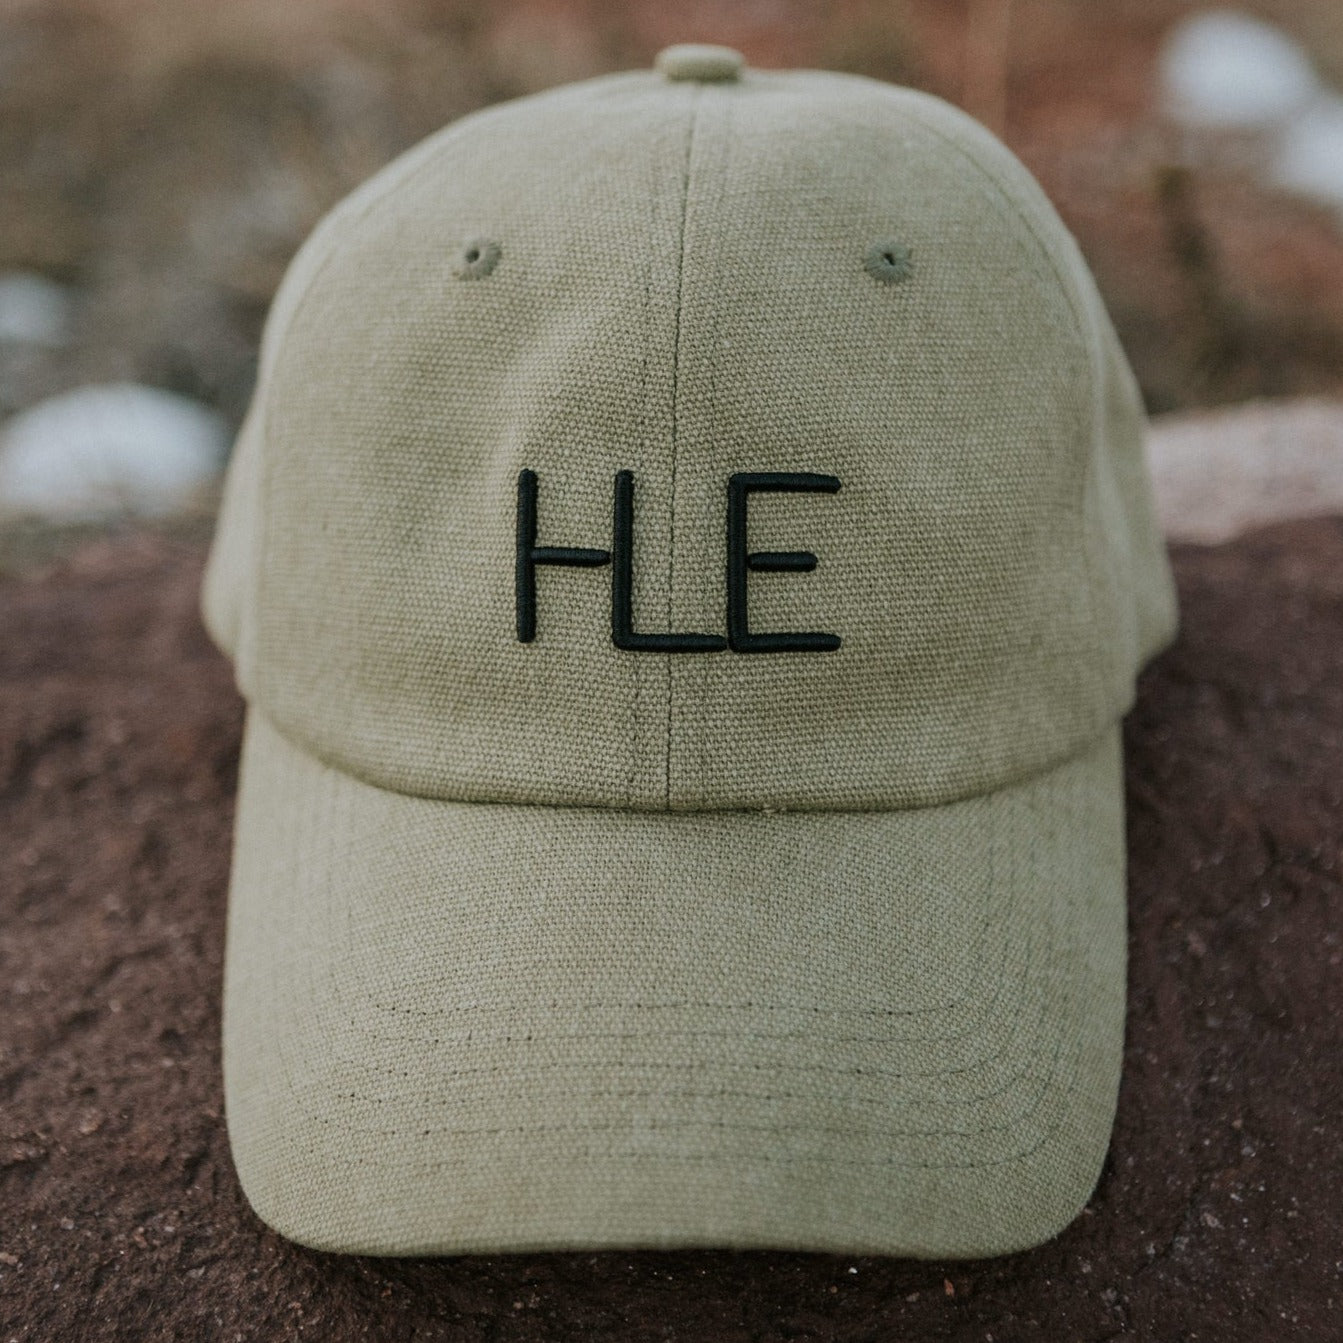 HLE- Dad Hat